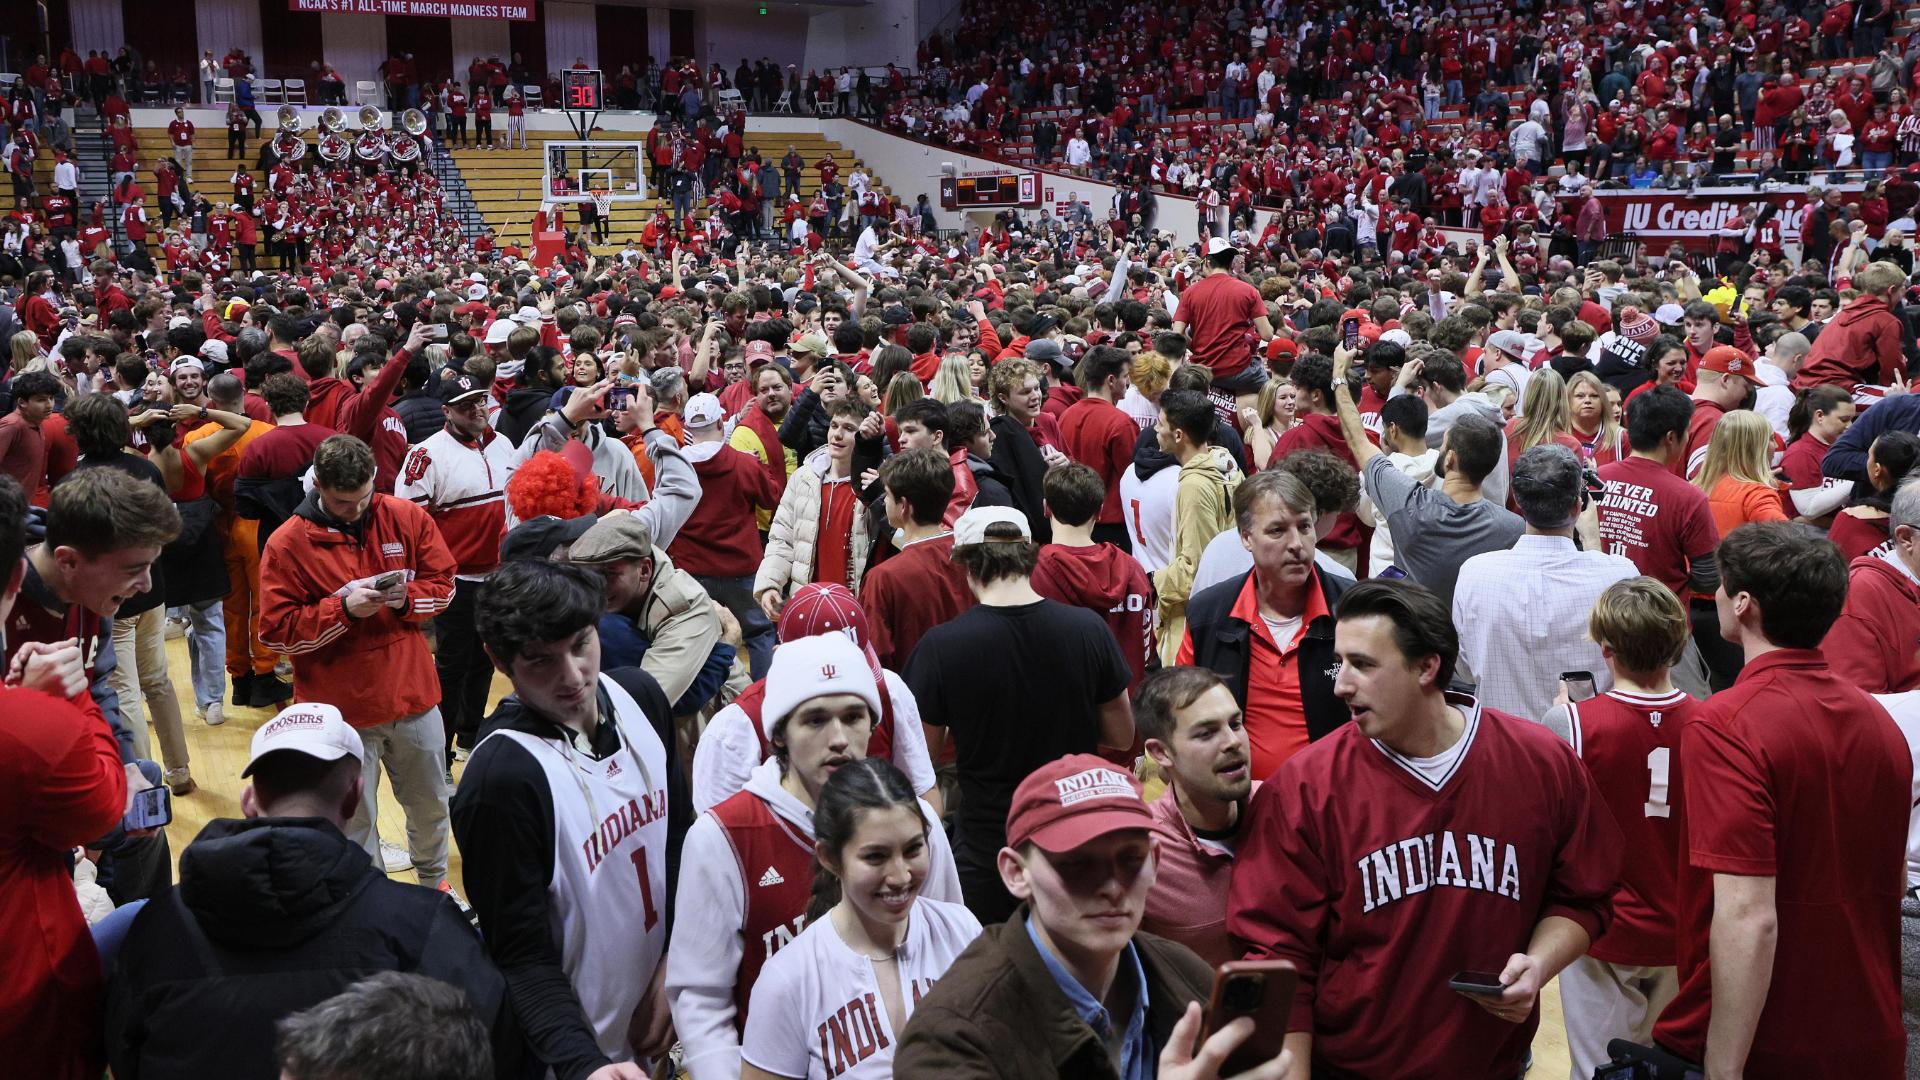 Indiana fans storm the court after defeating No. 1 Purdue